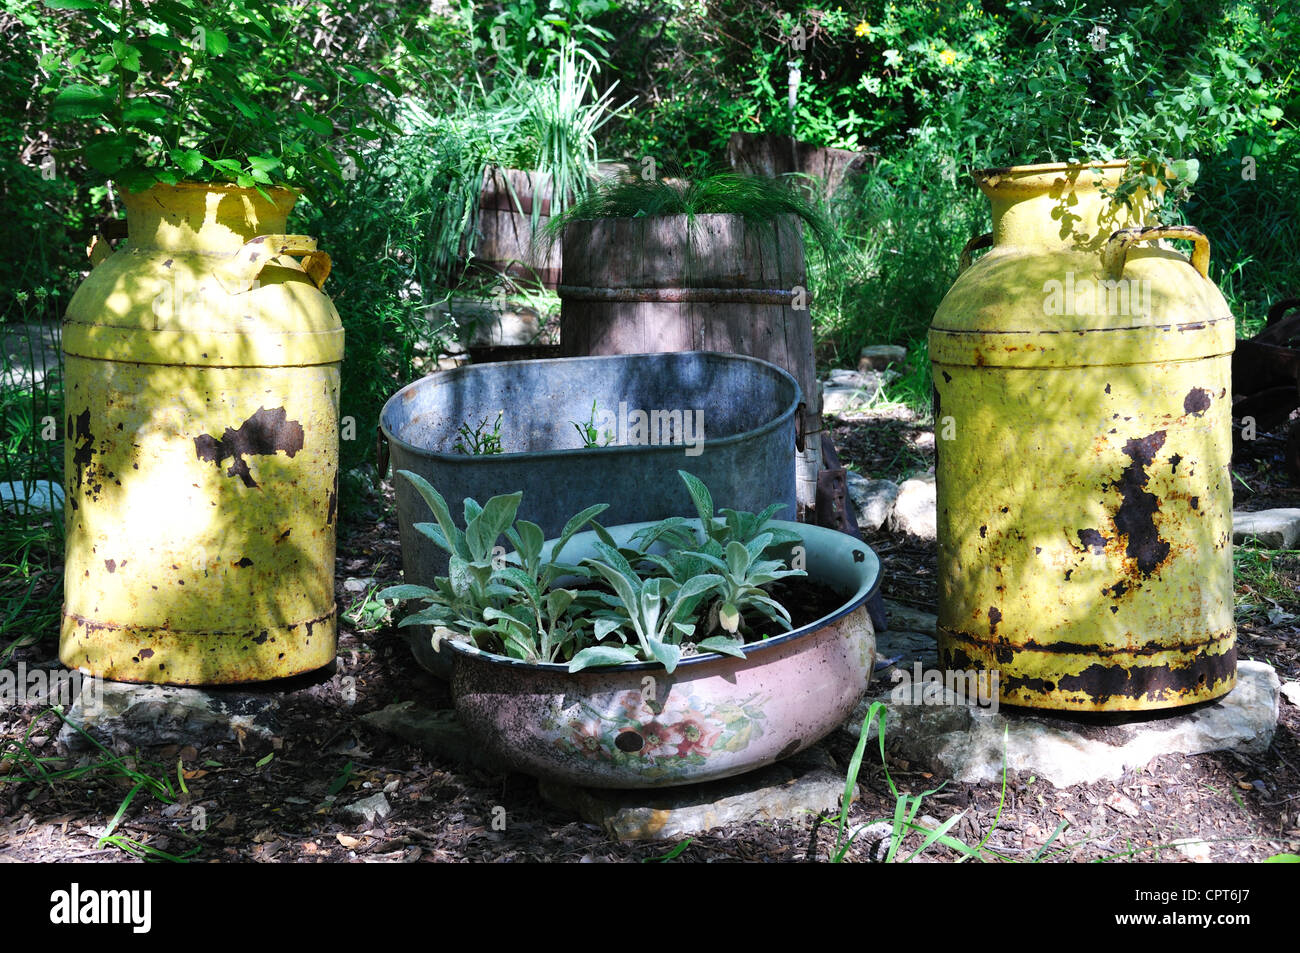 Vintage milk cans and wash basins, Texas, USA Stock Photo